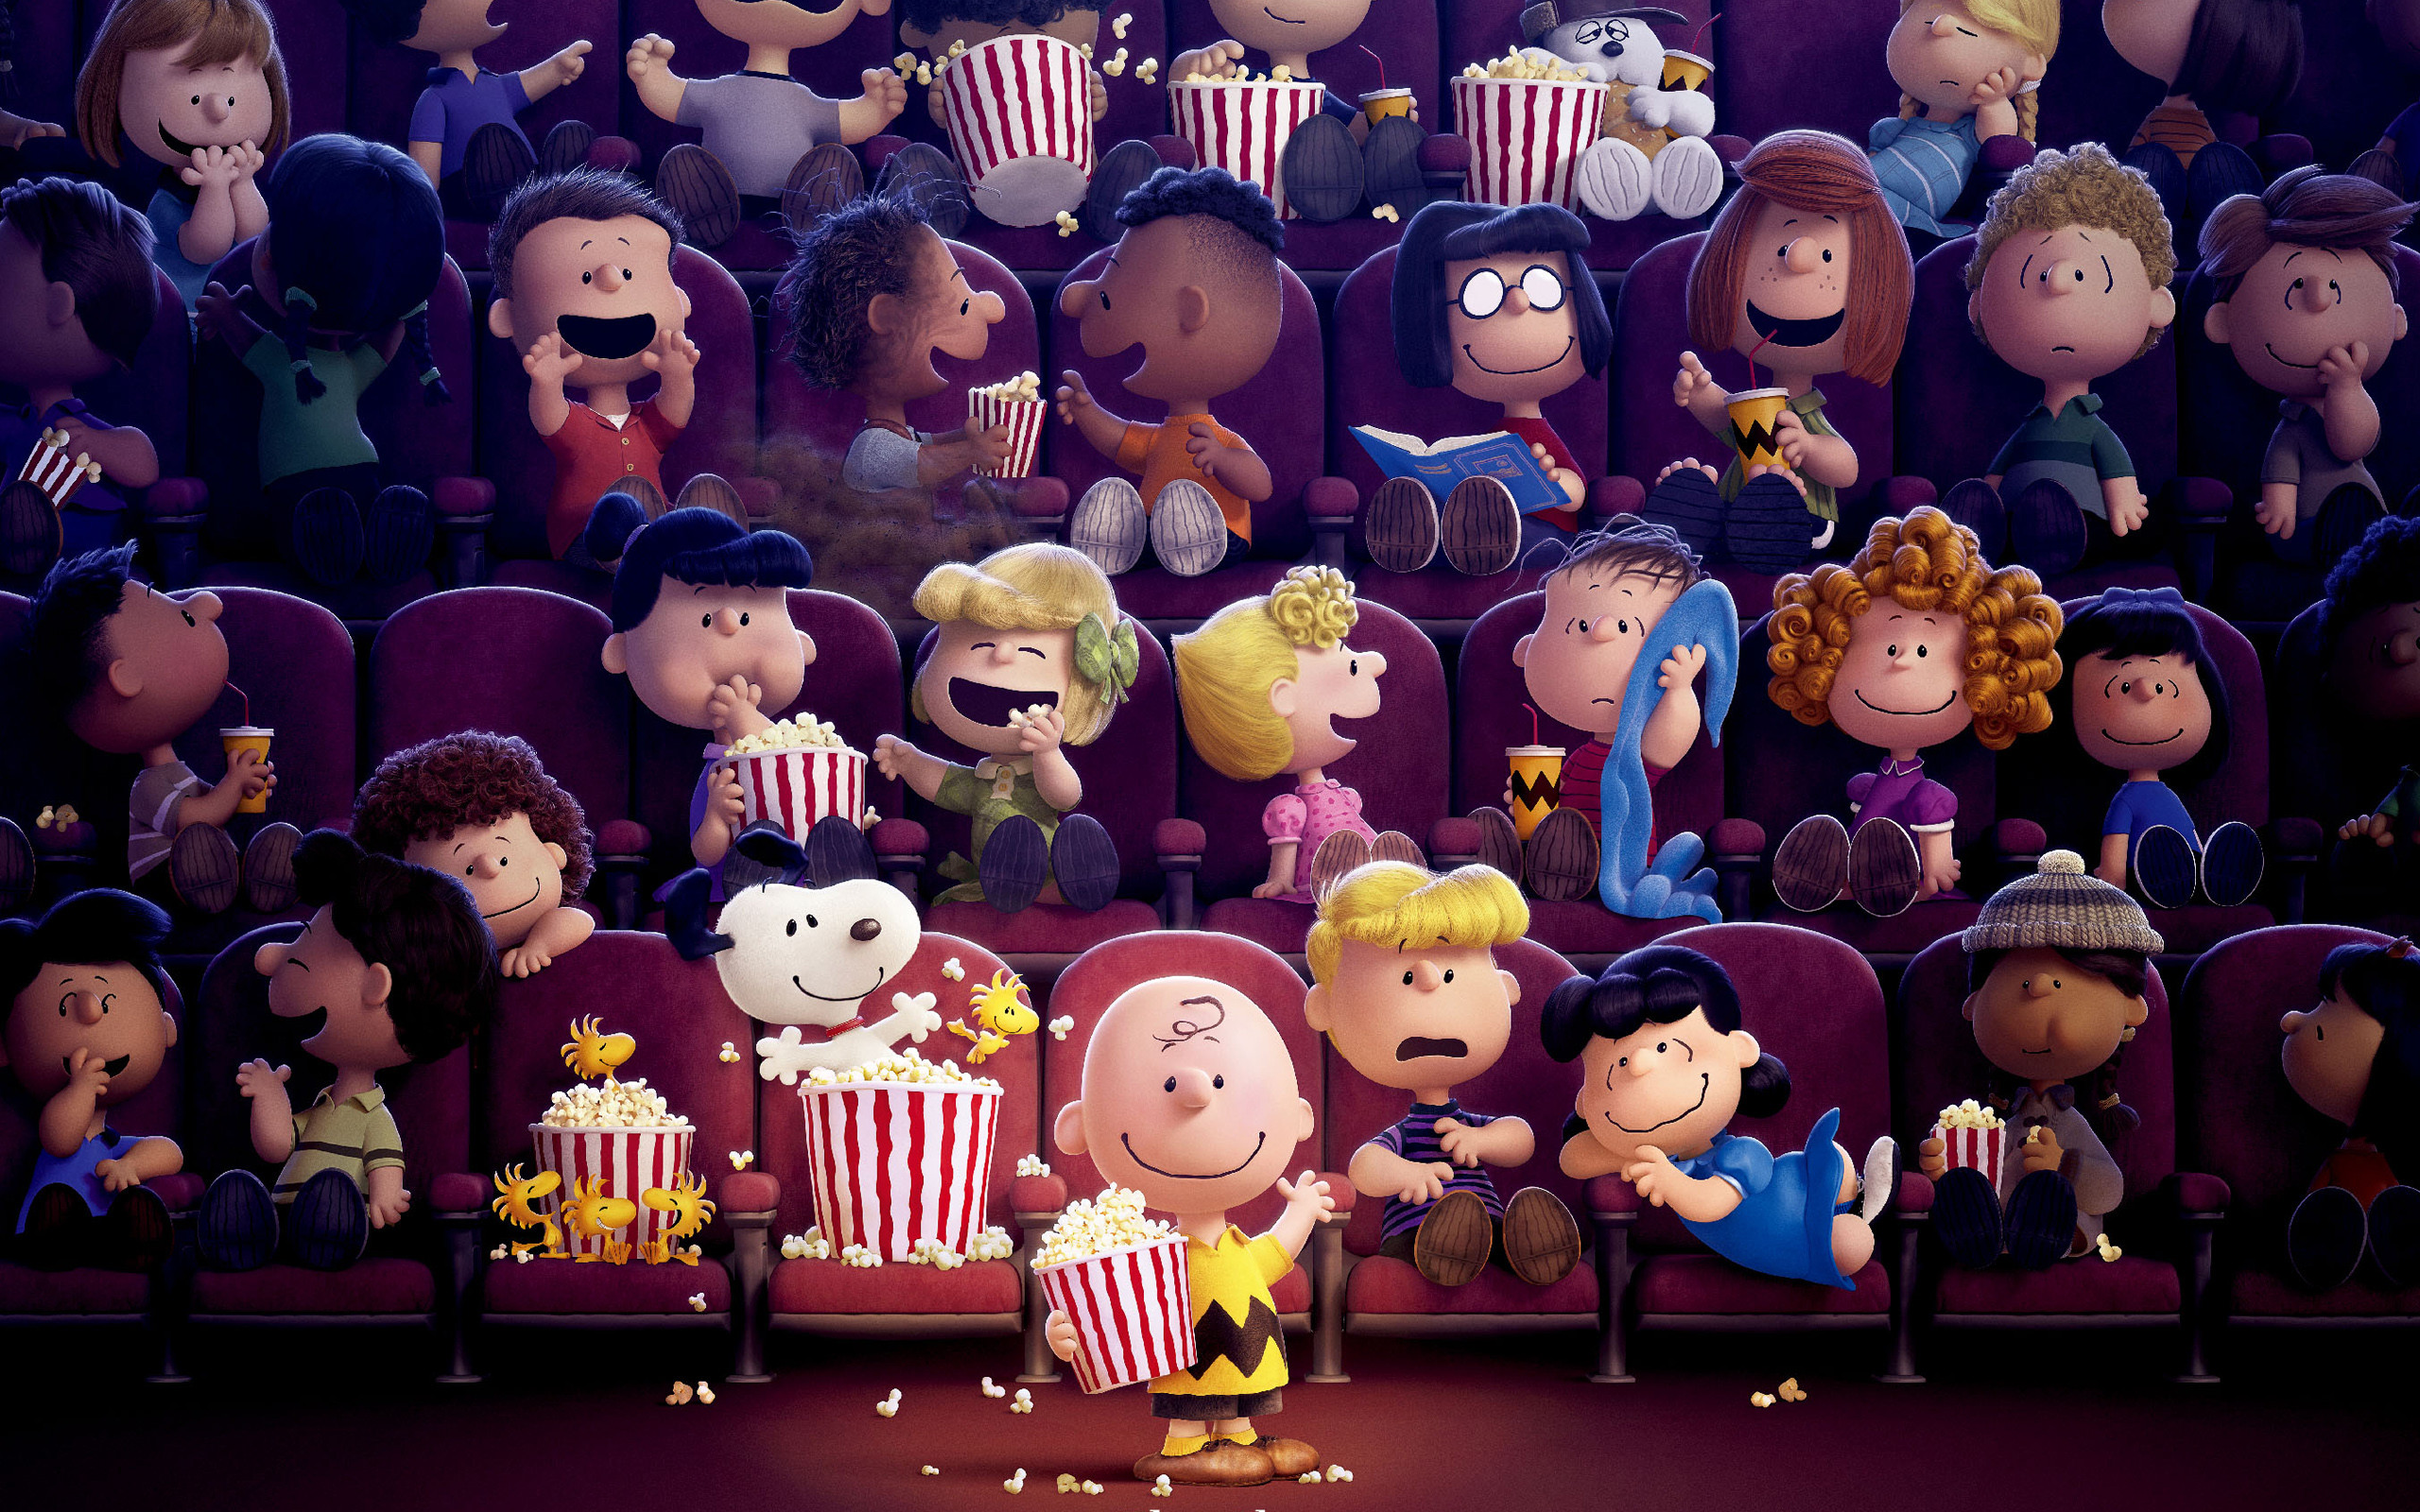 2560x1600 The Peanuts Movie Wallpapers | HD Wallpapers